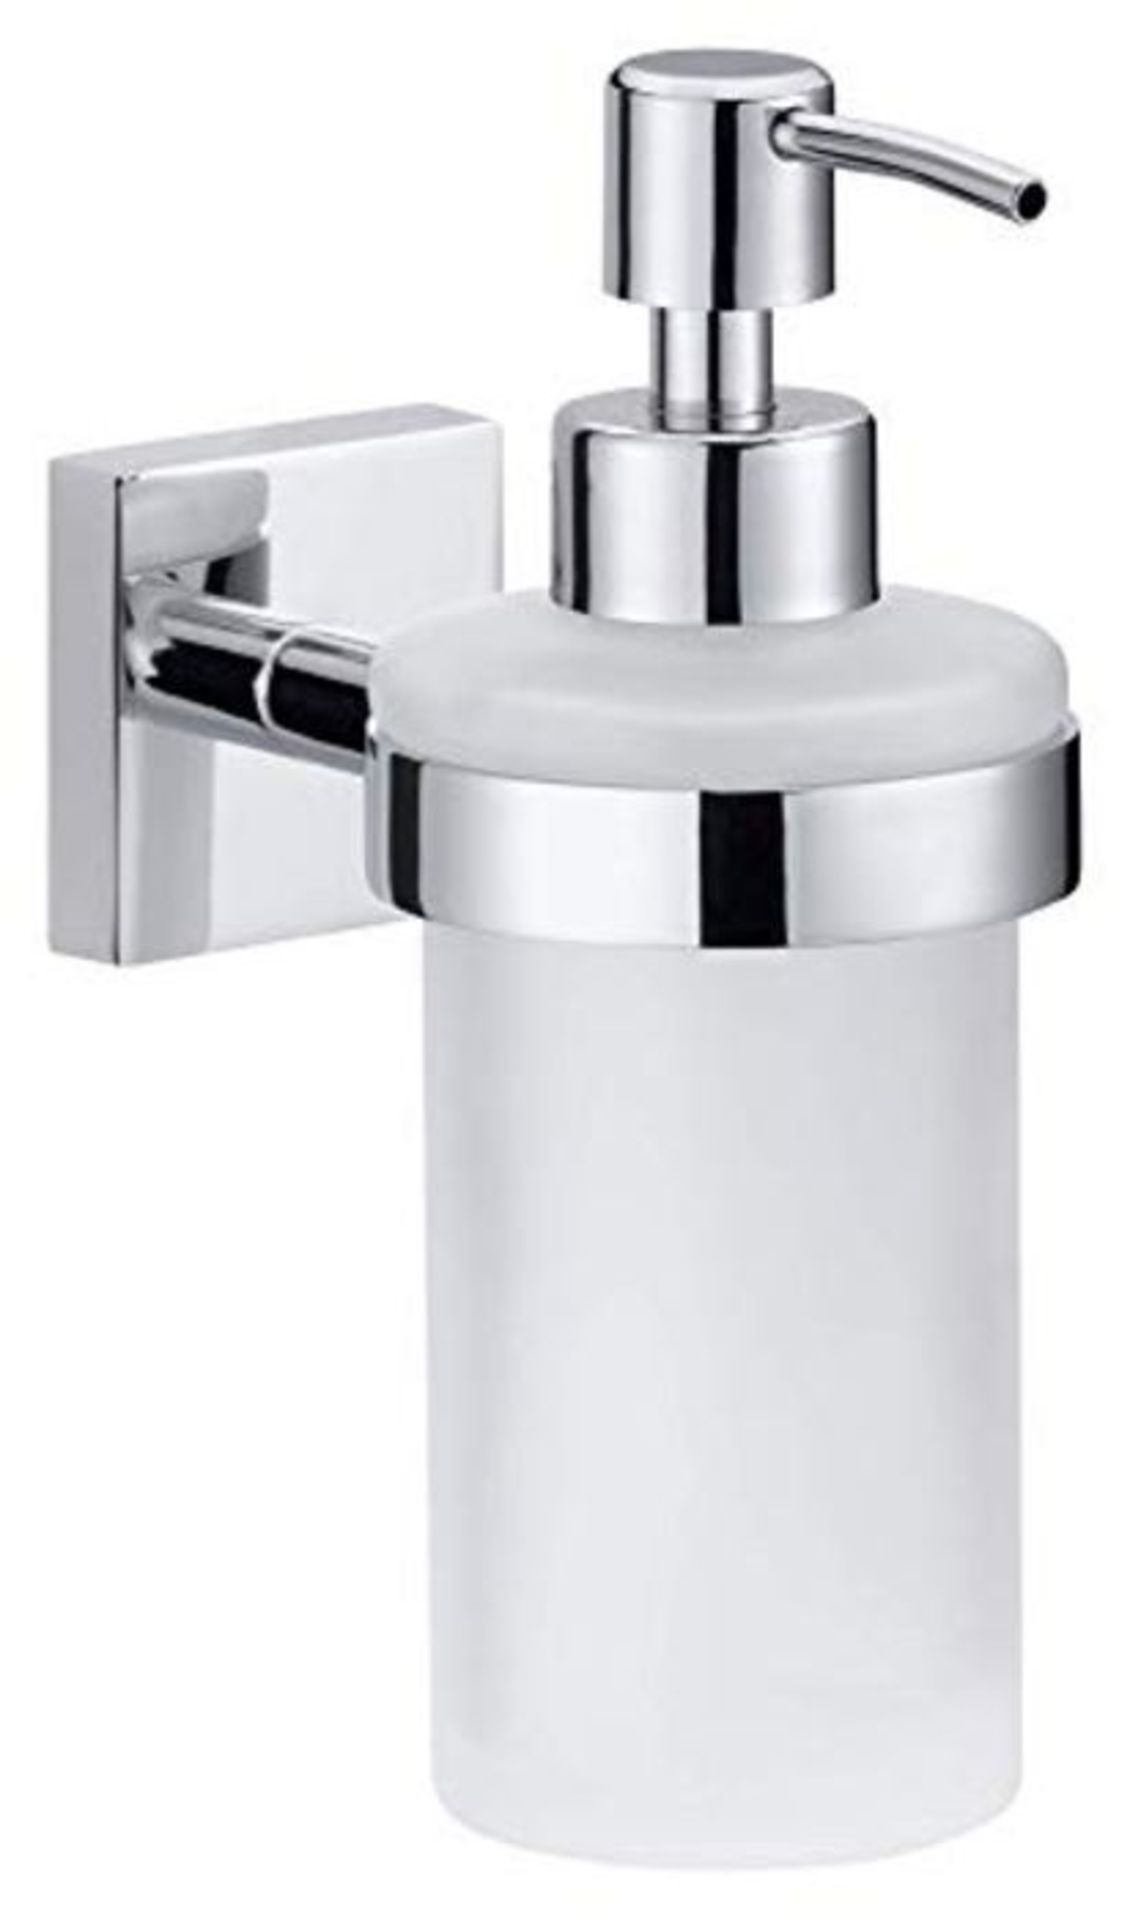 tesa Ekkro No Drill, Wall Mounted Soap Dispenser, Chrome-plated Metal, Removable Adhes